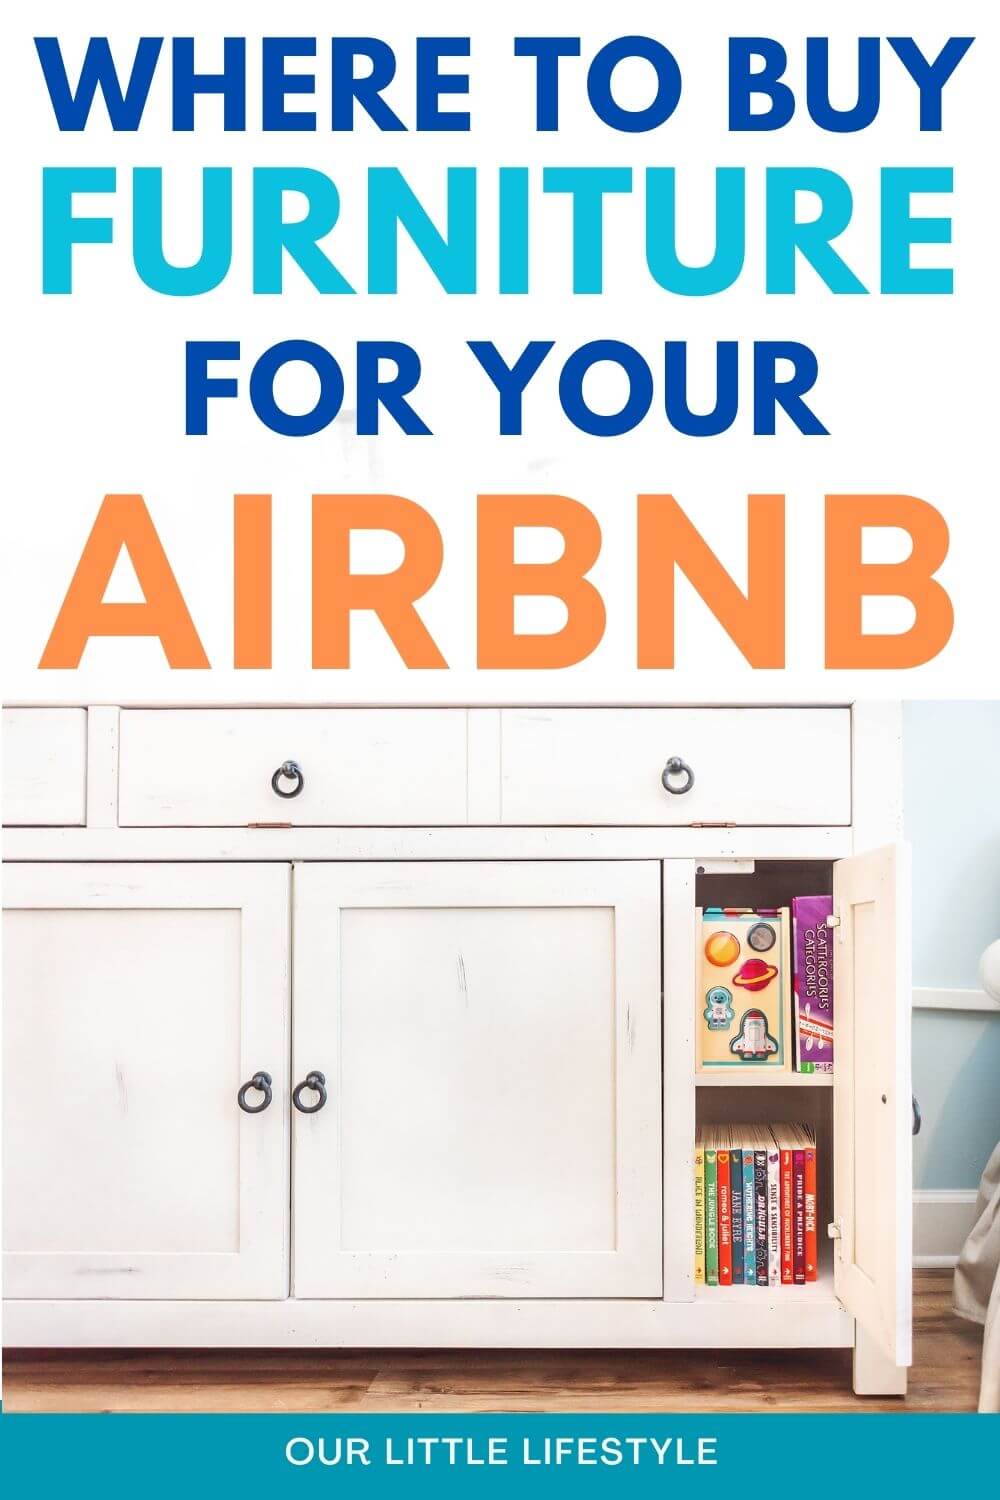 Airbnb Furniture Guide Blog Post